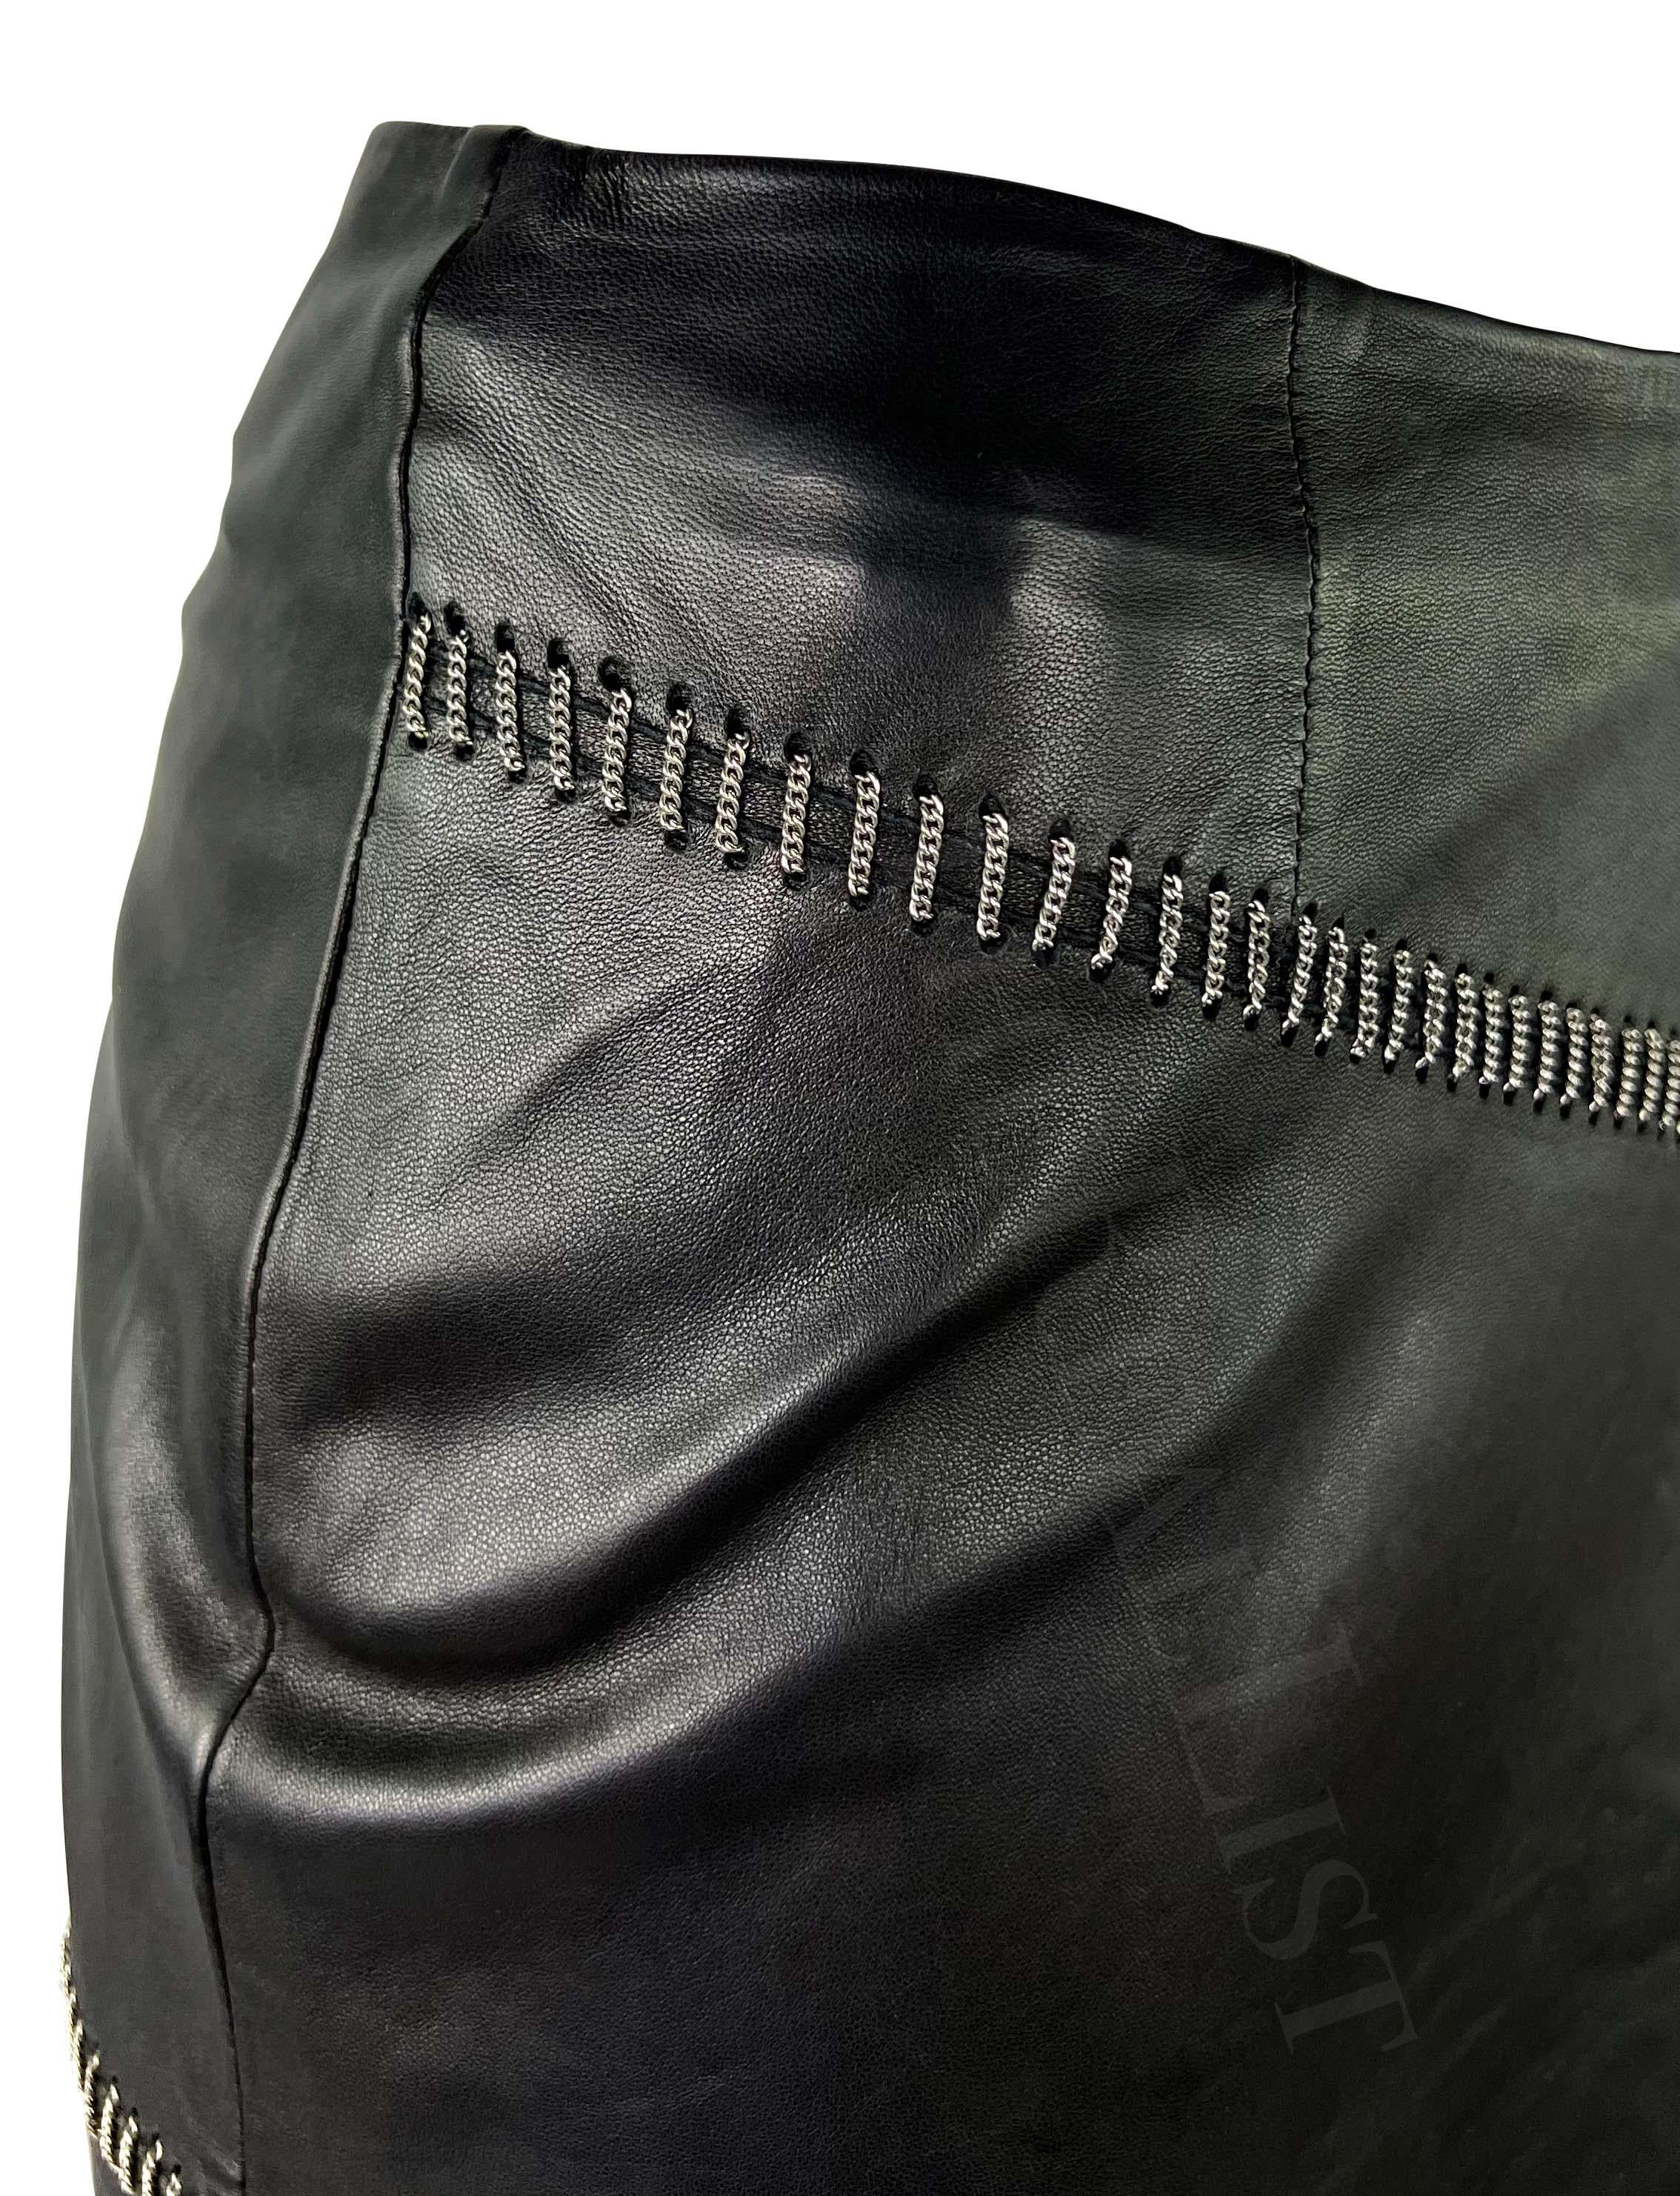 Presenting a fabulous black leather Gianni Versace pencil skirt, designed by Donatella Versace. From the Spring/Summer 1999 collection, this skirt is constructed entirely of leather and is complete with a woven asymmetrical silver-tone chain accent.